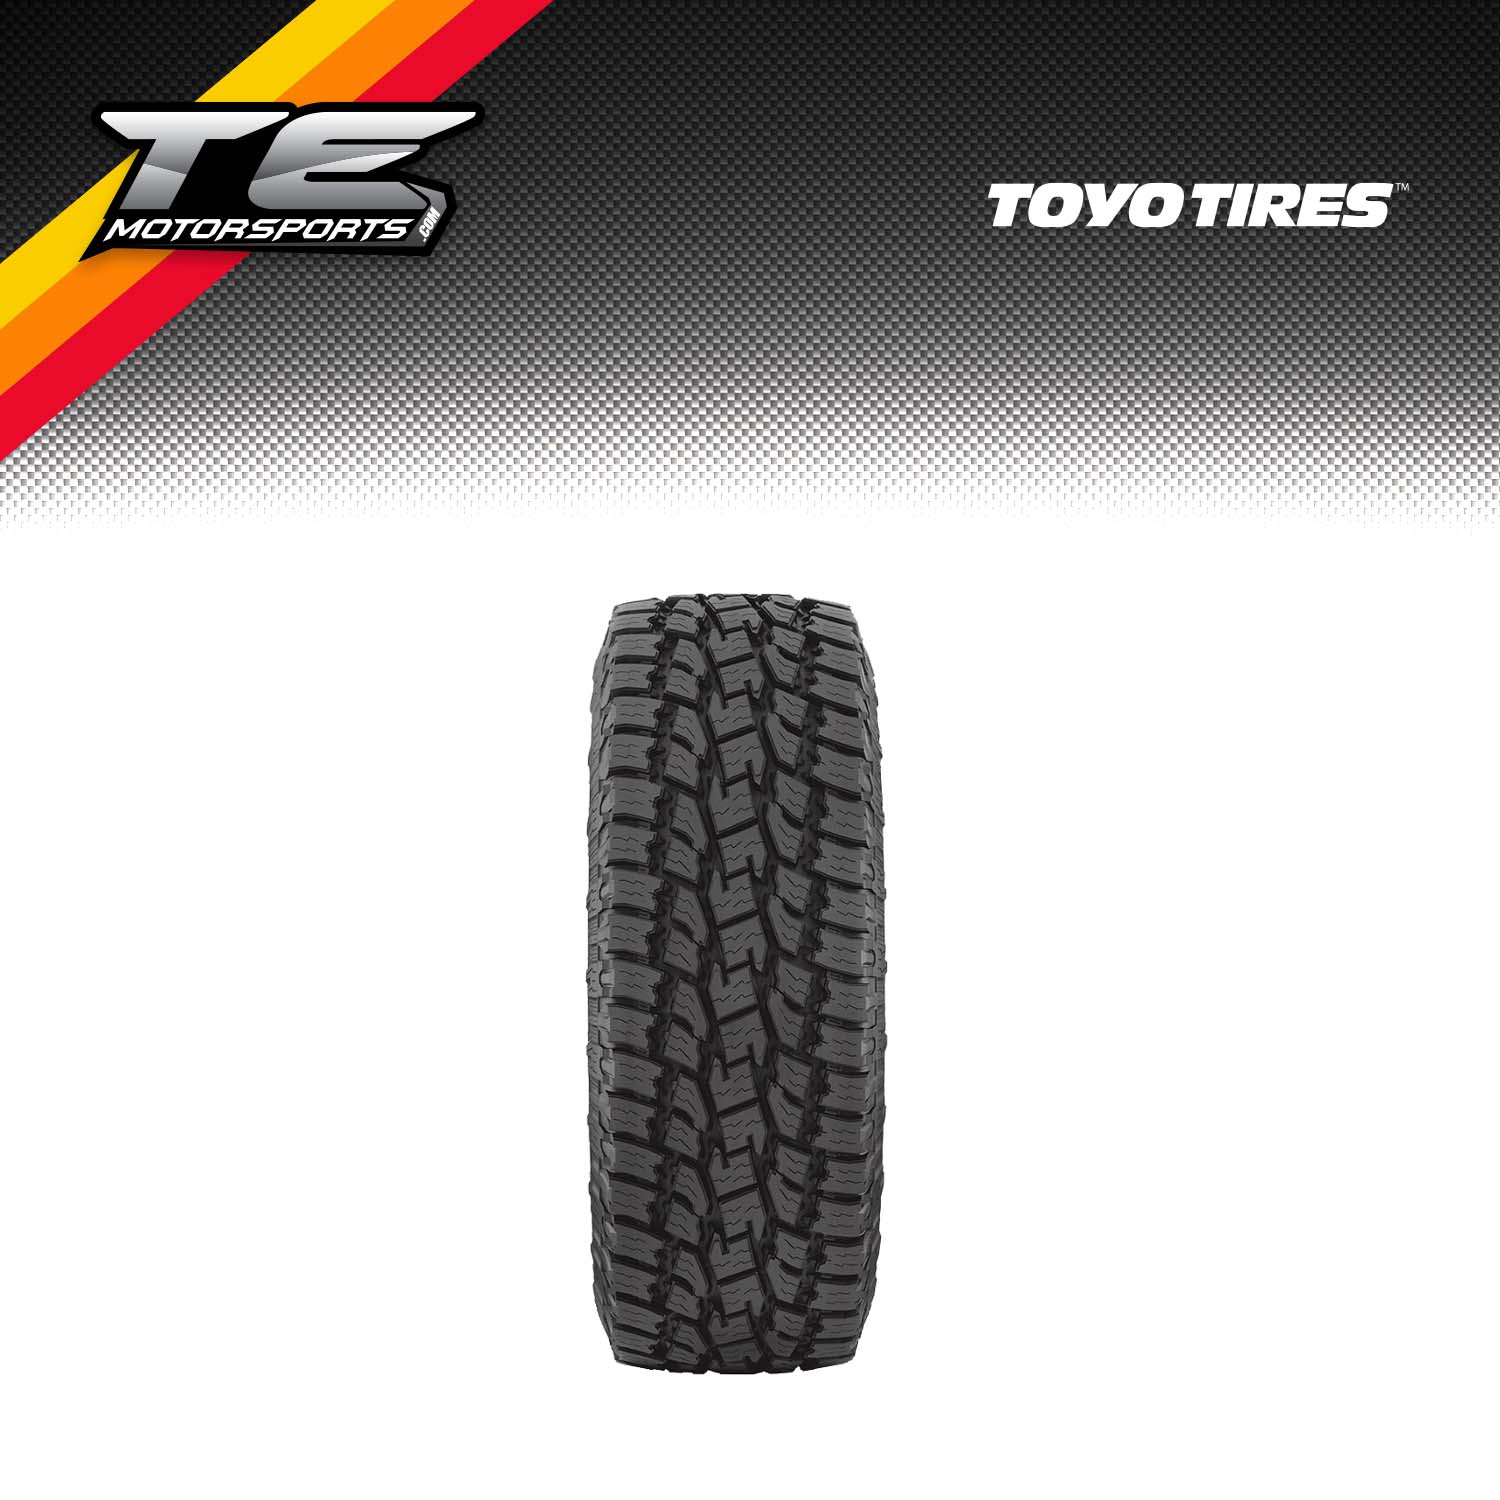 Toyo Tires LT285/65R18 Tire, Open Country A/T II - 352720